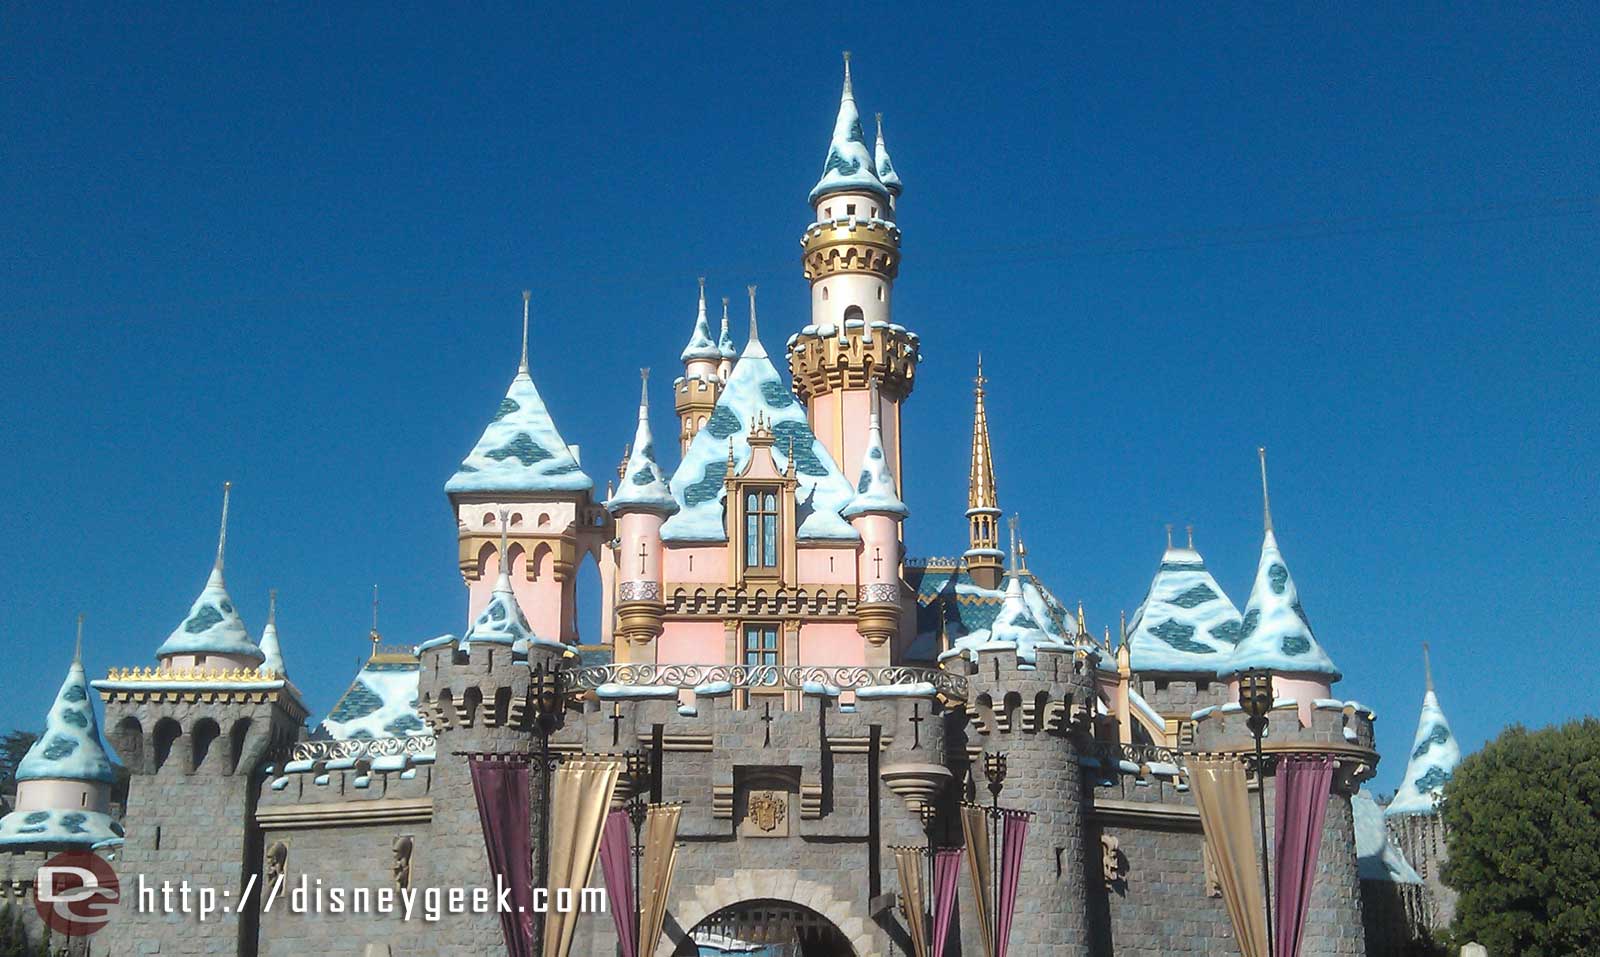 Sleeping Beauty Castle this afternoon. Only the snow remains.